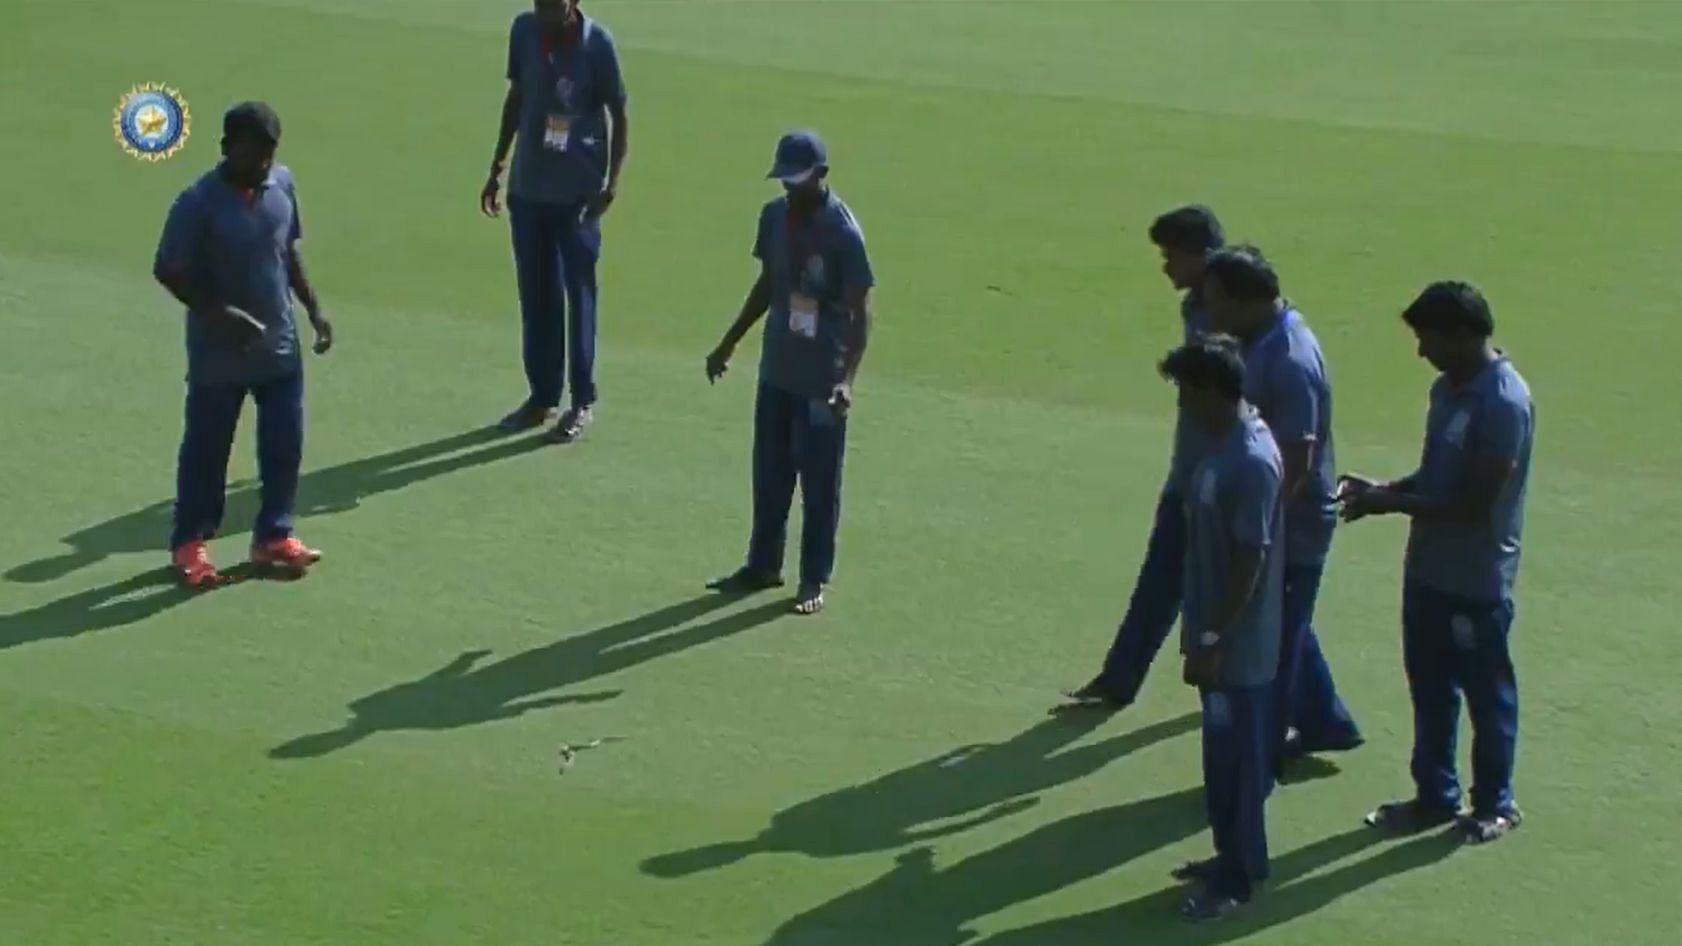 A snake appeared on the ground and delayed defending champions Vidarbha’s game against Andhra Pradesh.